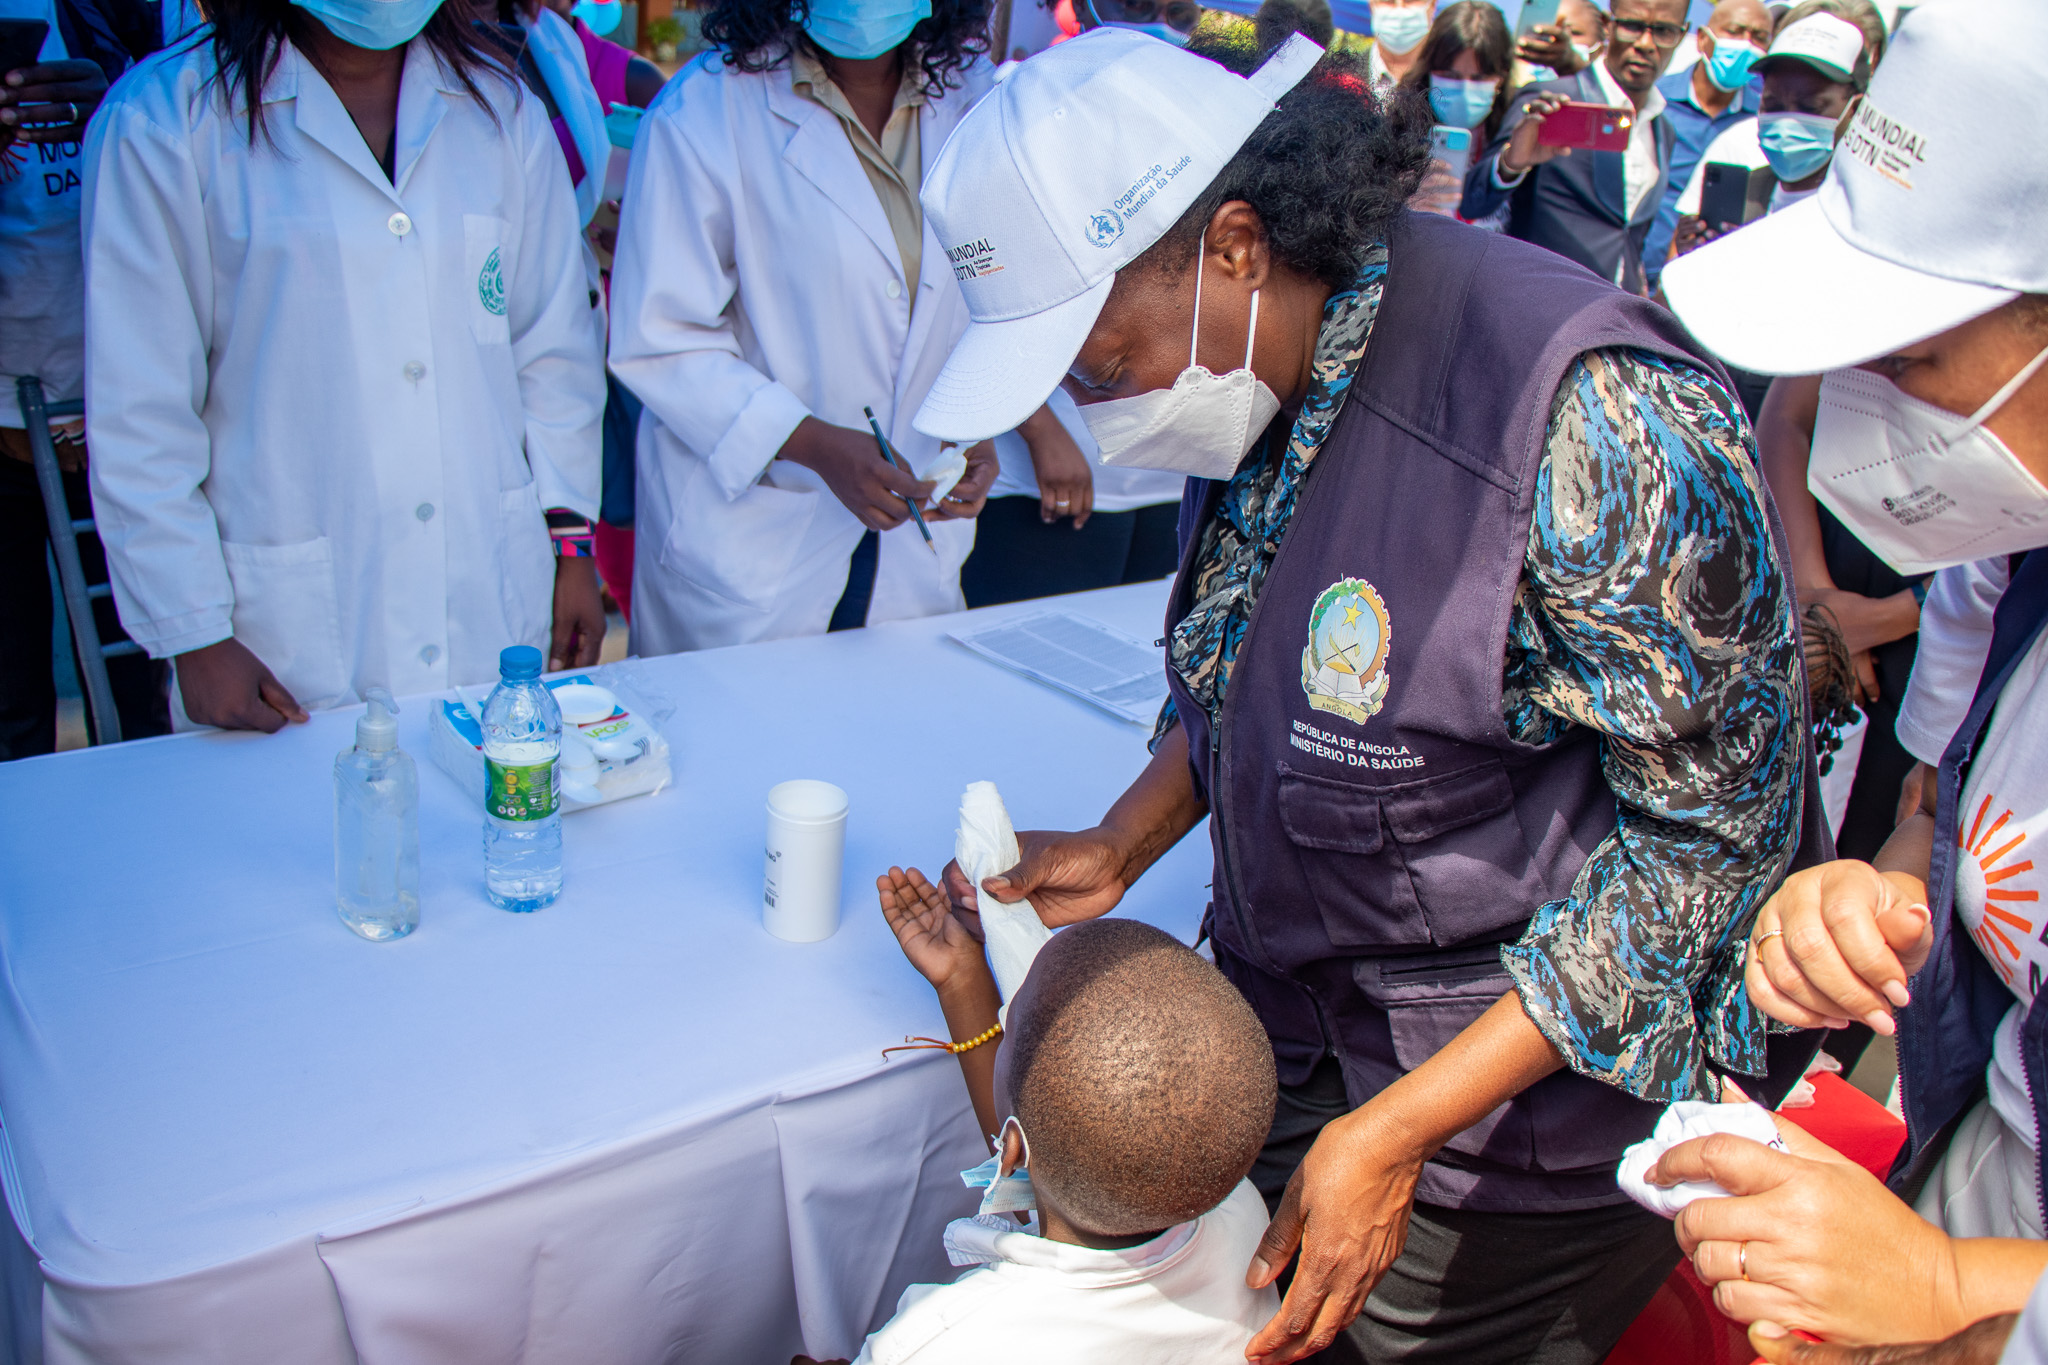 Minister of Health assisting the population